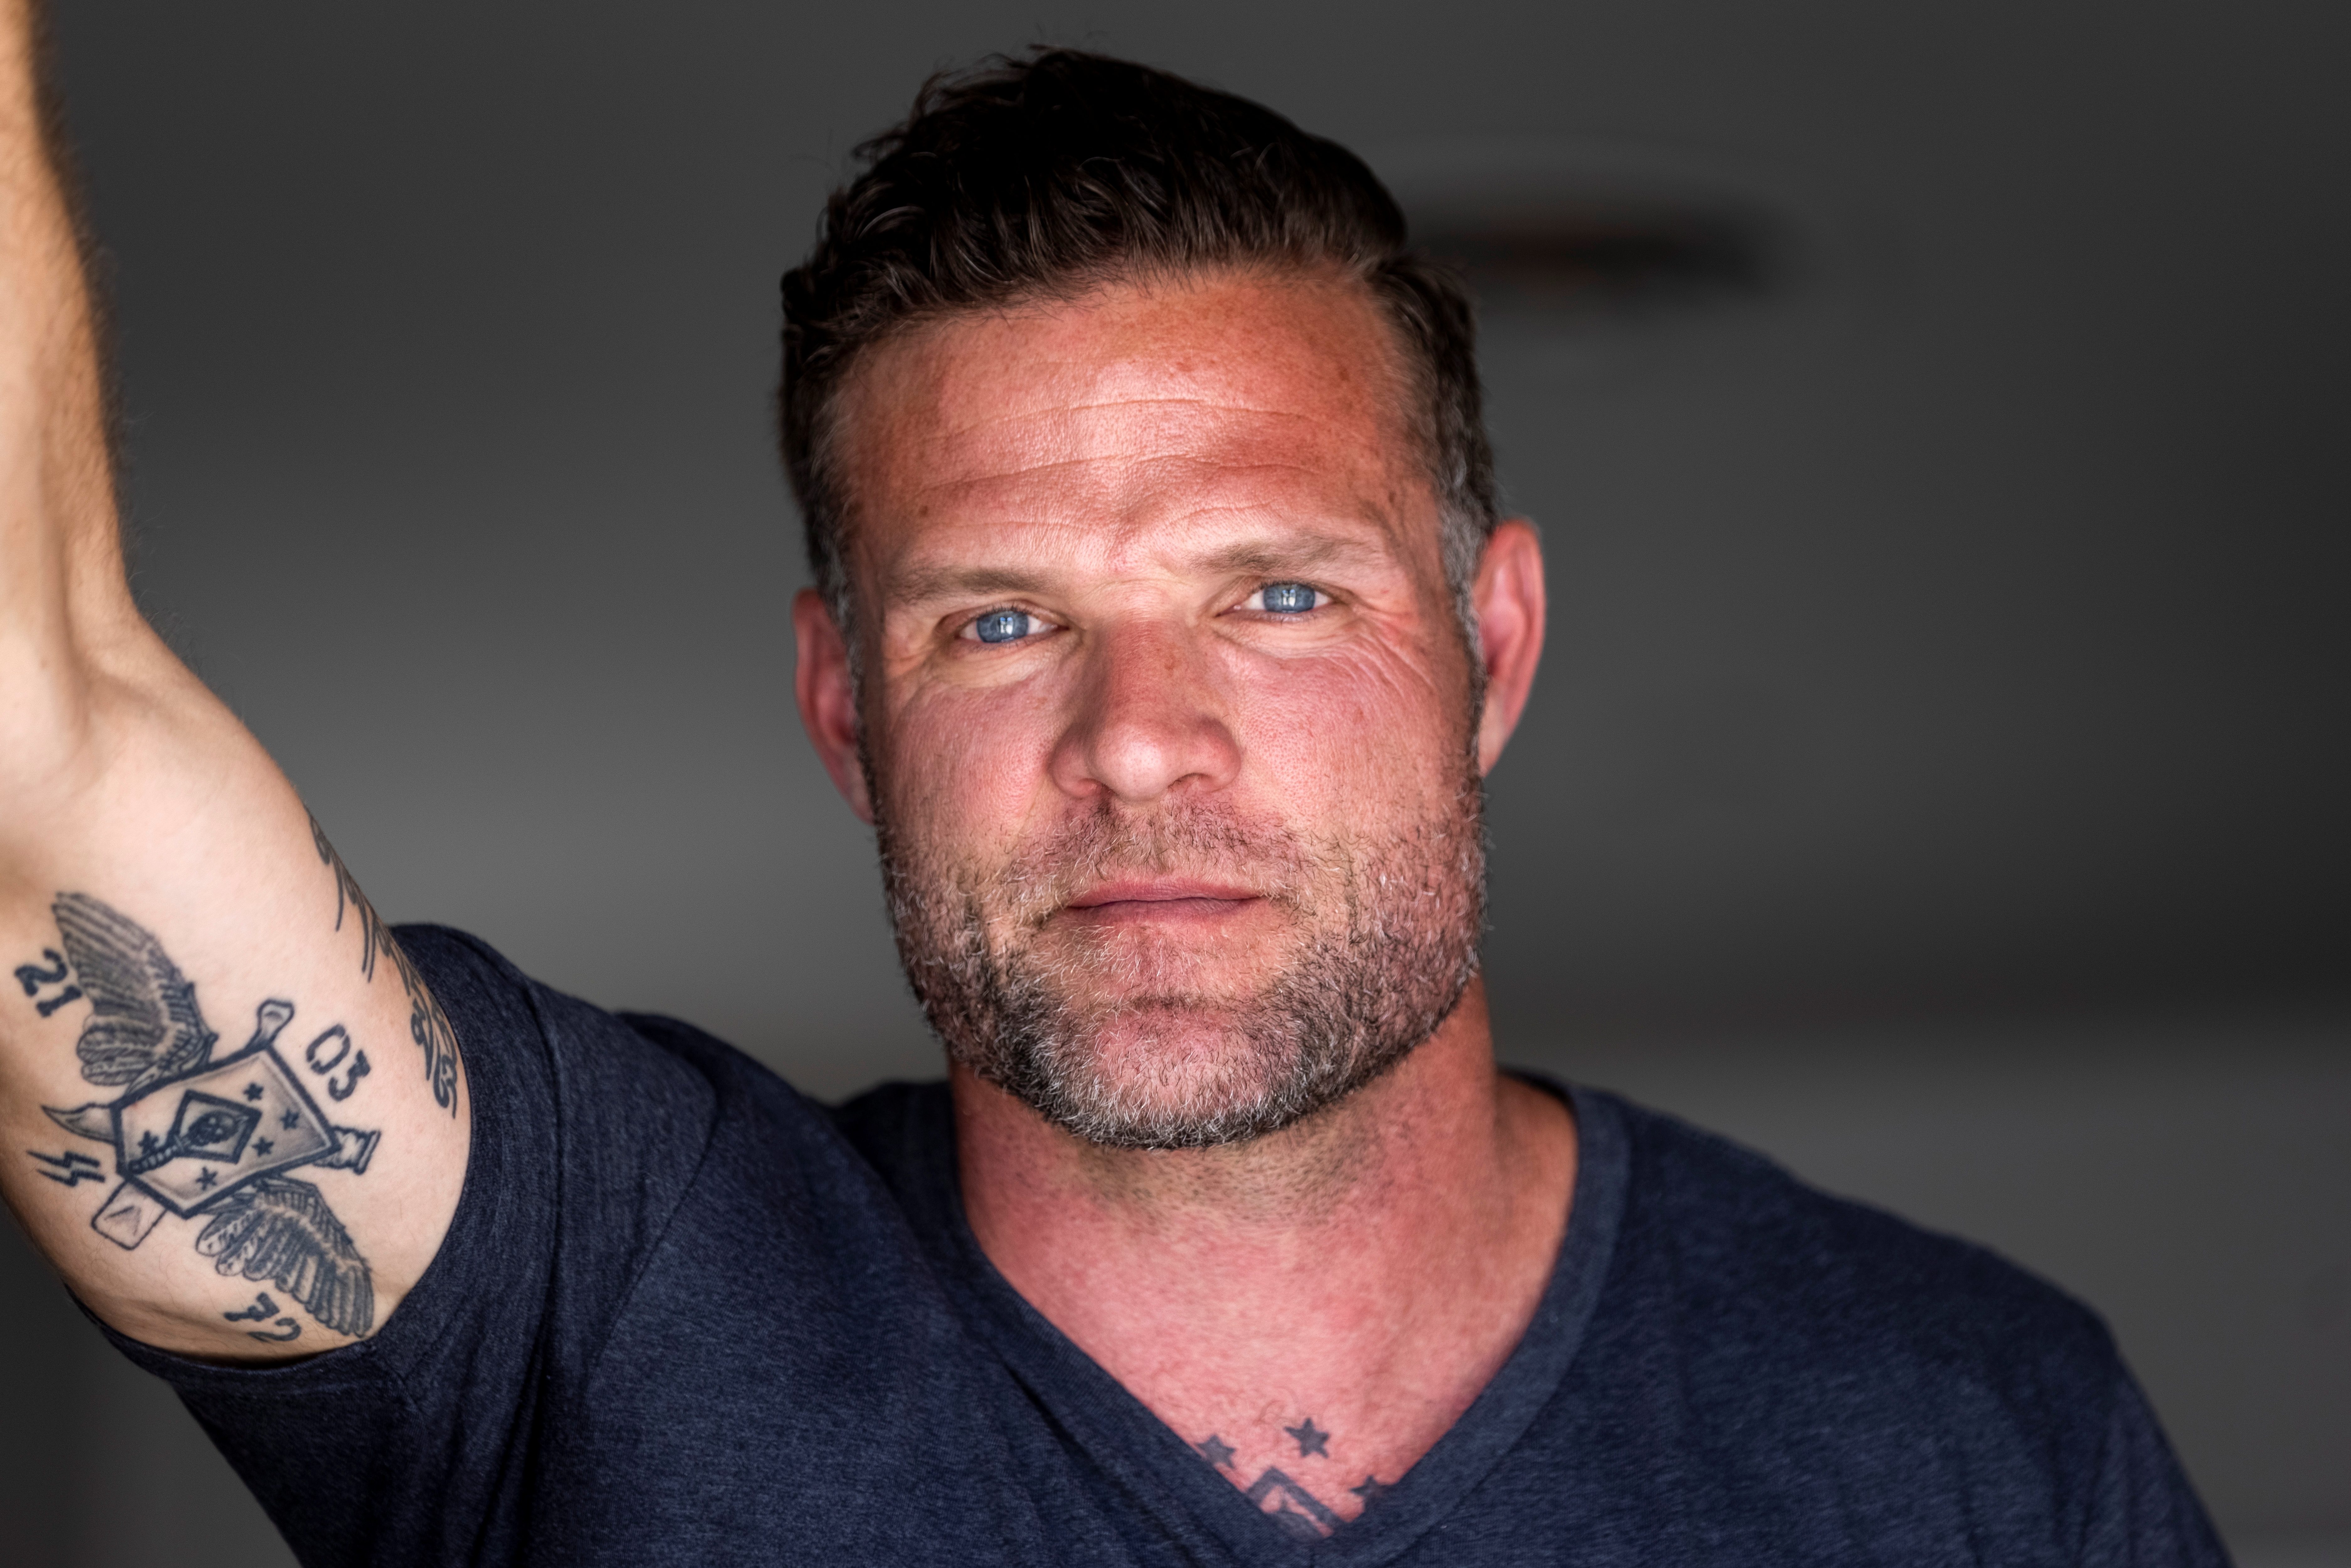 A U.S special forces veteran Jason Lilley poses for a portrait at his home in Garden Grove, California, U.S.,  July 9, 2021. Lilley spoke to Reuters about his experience in Afghanistan and his thoughts as the U.S. leaves the country.  Picture taken July 9, 202.   REUTERS/Mike Blake